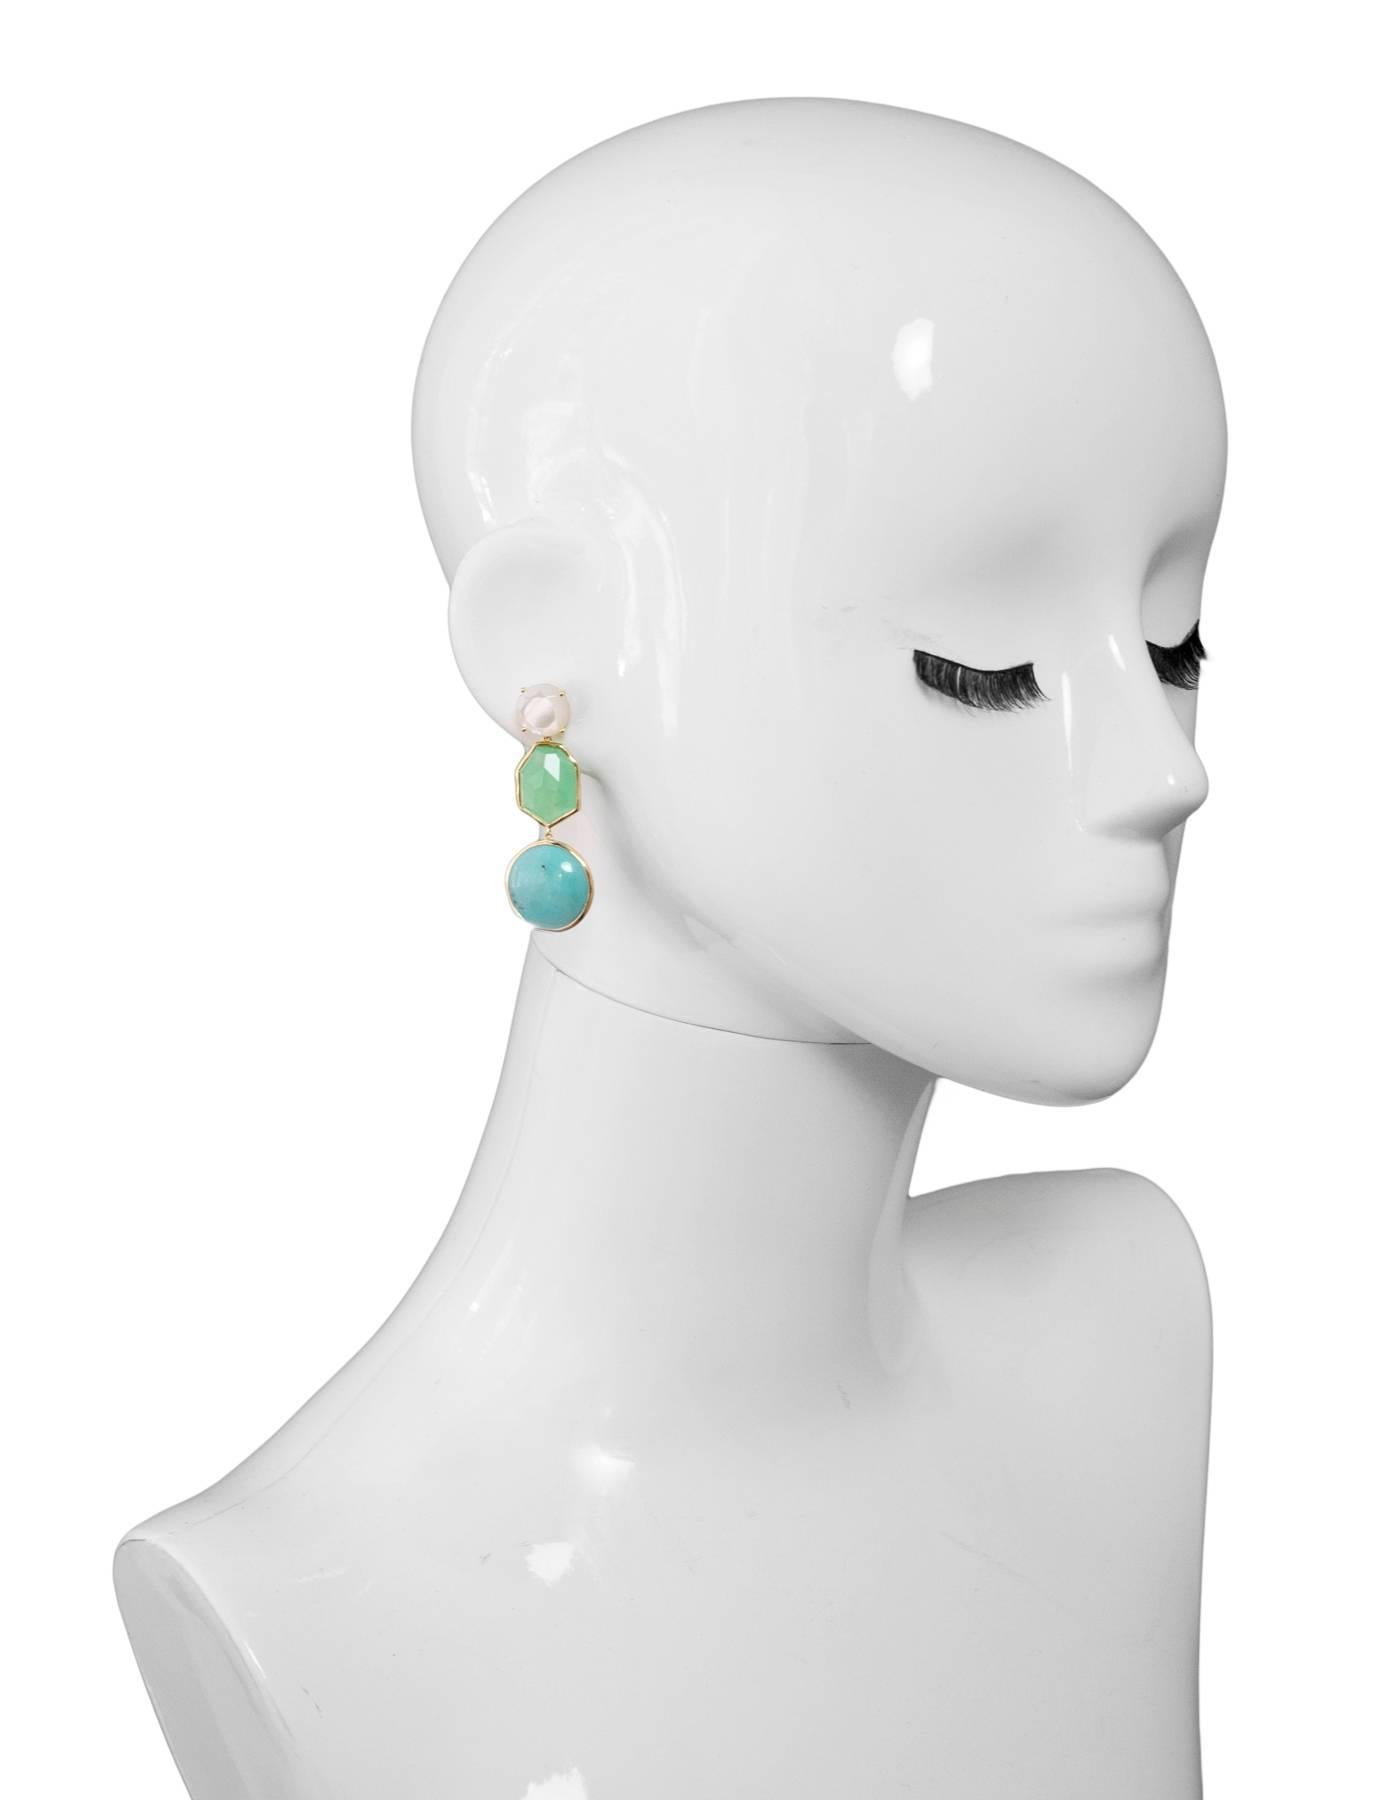 Ippolita Rock Candy Gelato Drop Earrings

Features mother of pearl, chrysoprase and turquoise stones set in 18k yellow gold

Color: White, gold, green, blue
Materials: Mother of pearl, chrysoprase, turquise, gold
Closure: Pierced backs
Stamp: